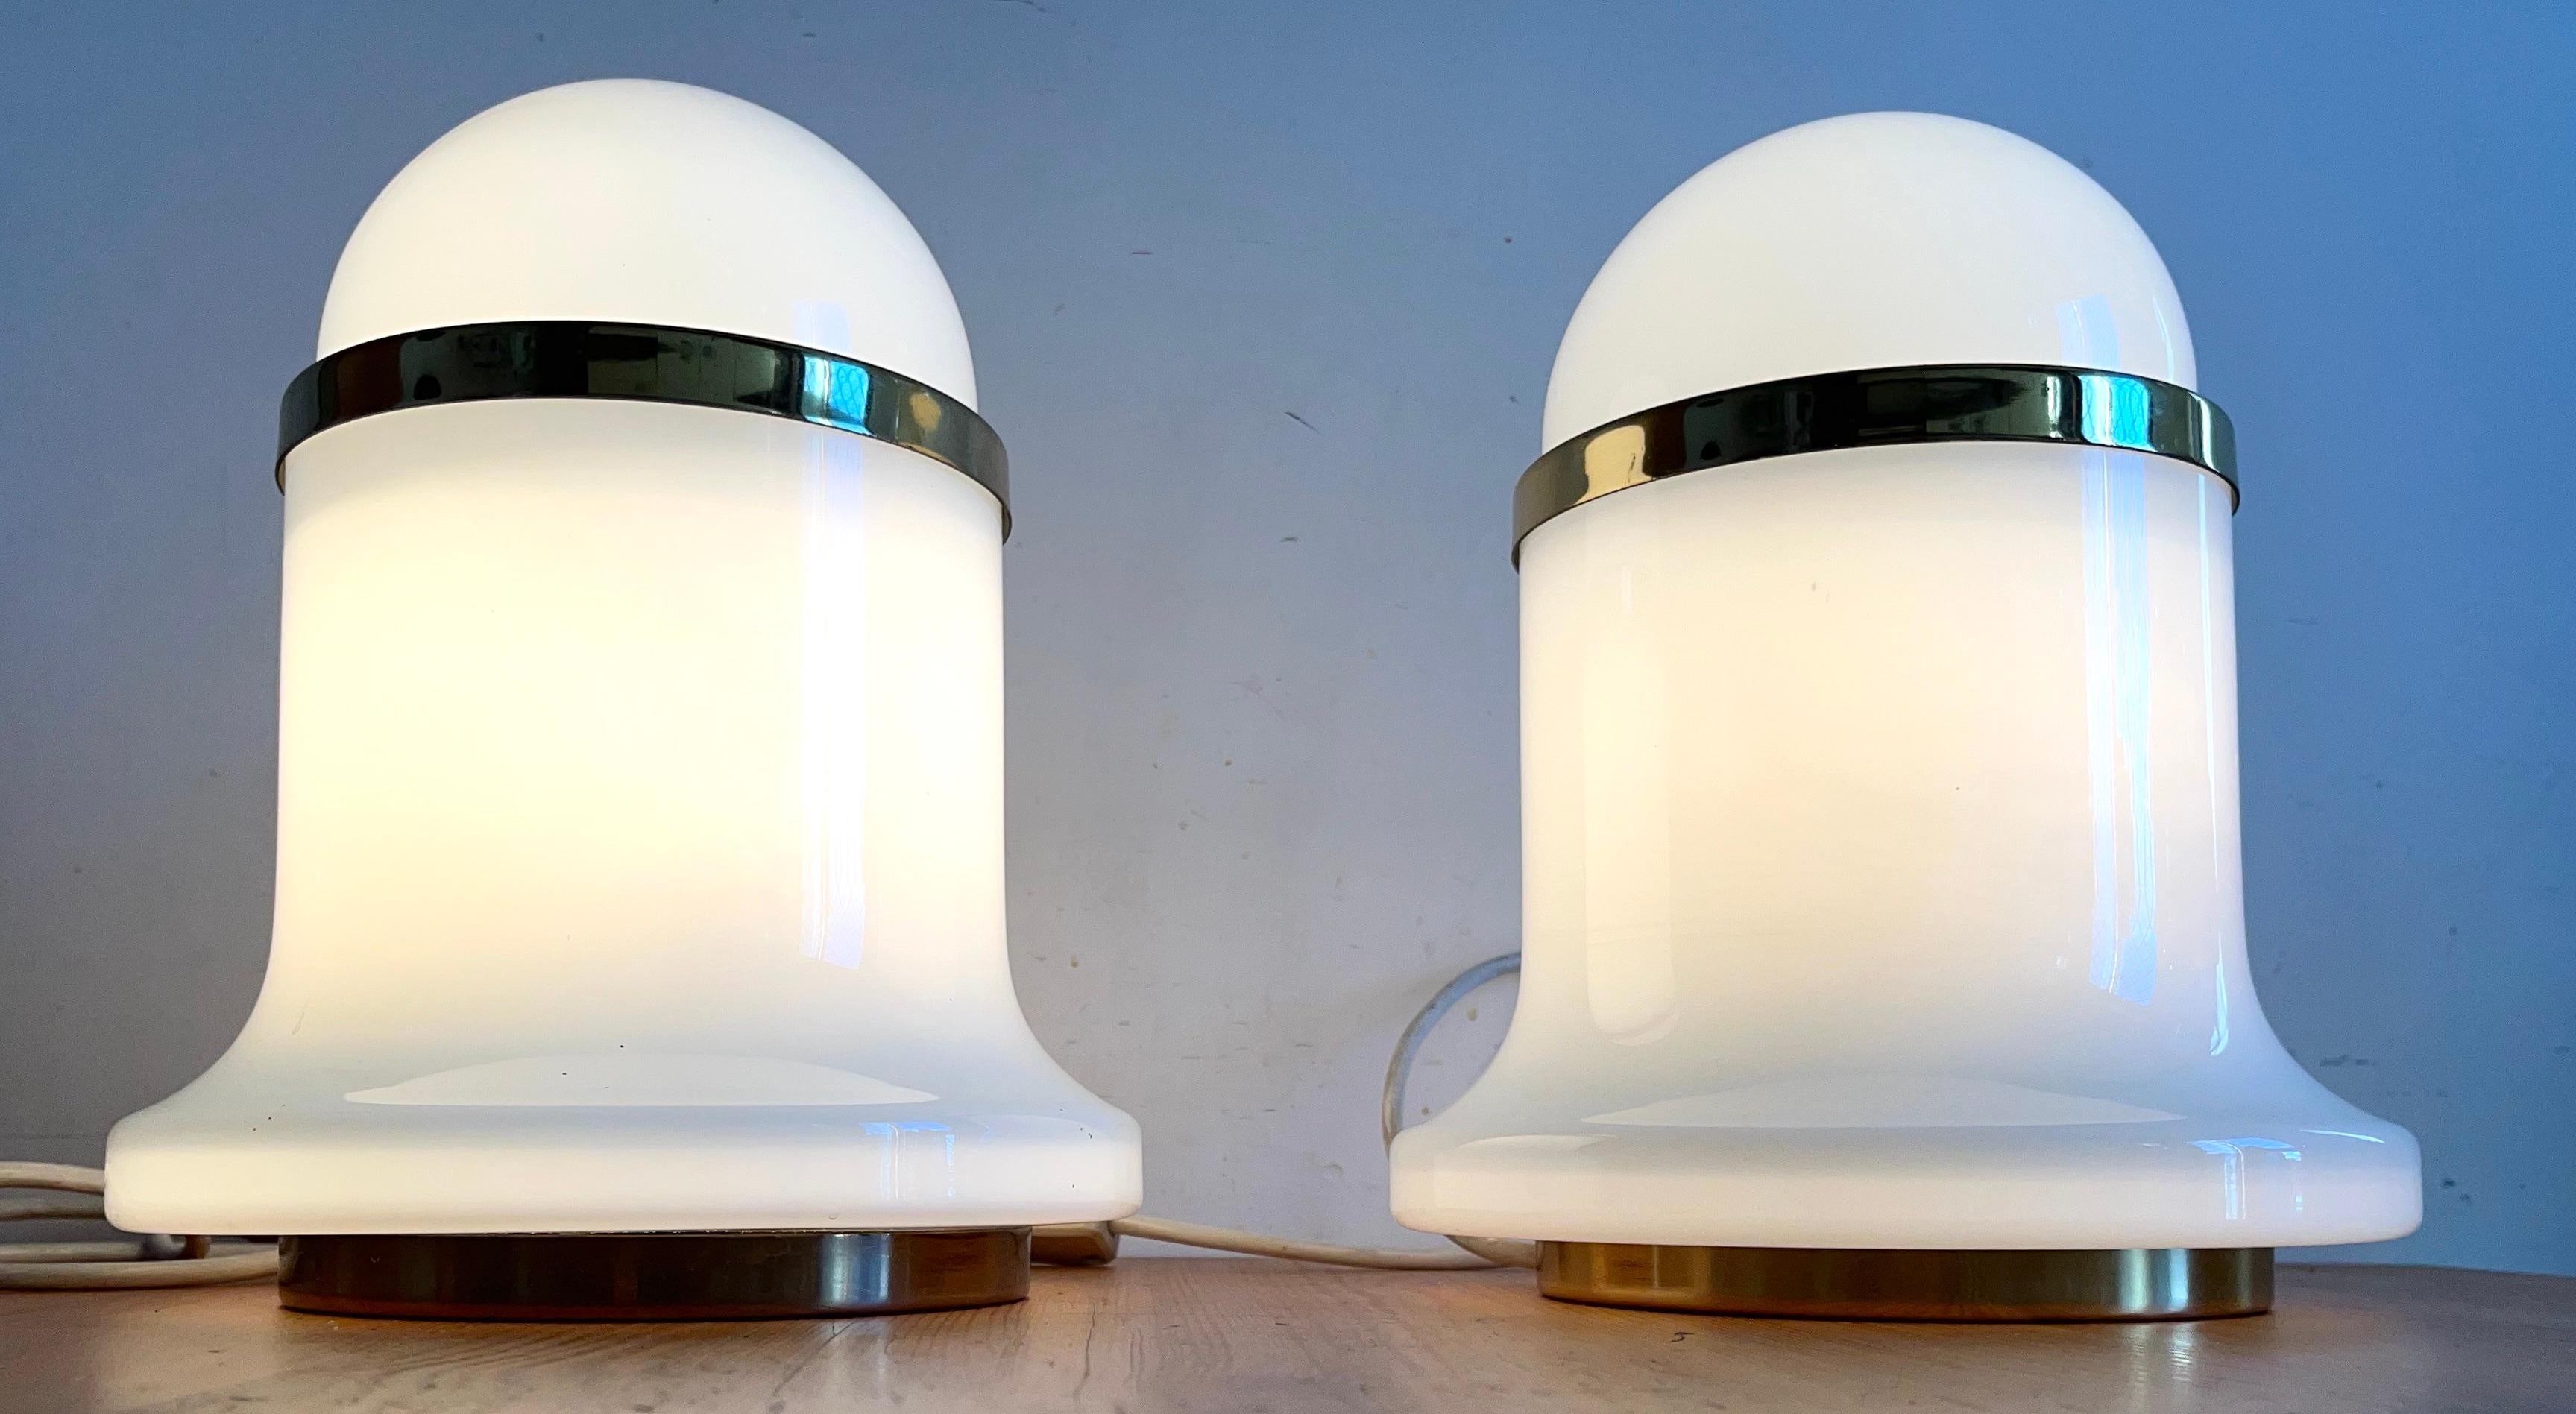 Mid-Century Modern Table lamp by Reggiani from the 1960s/70s